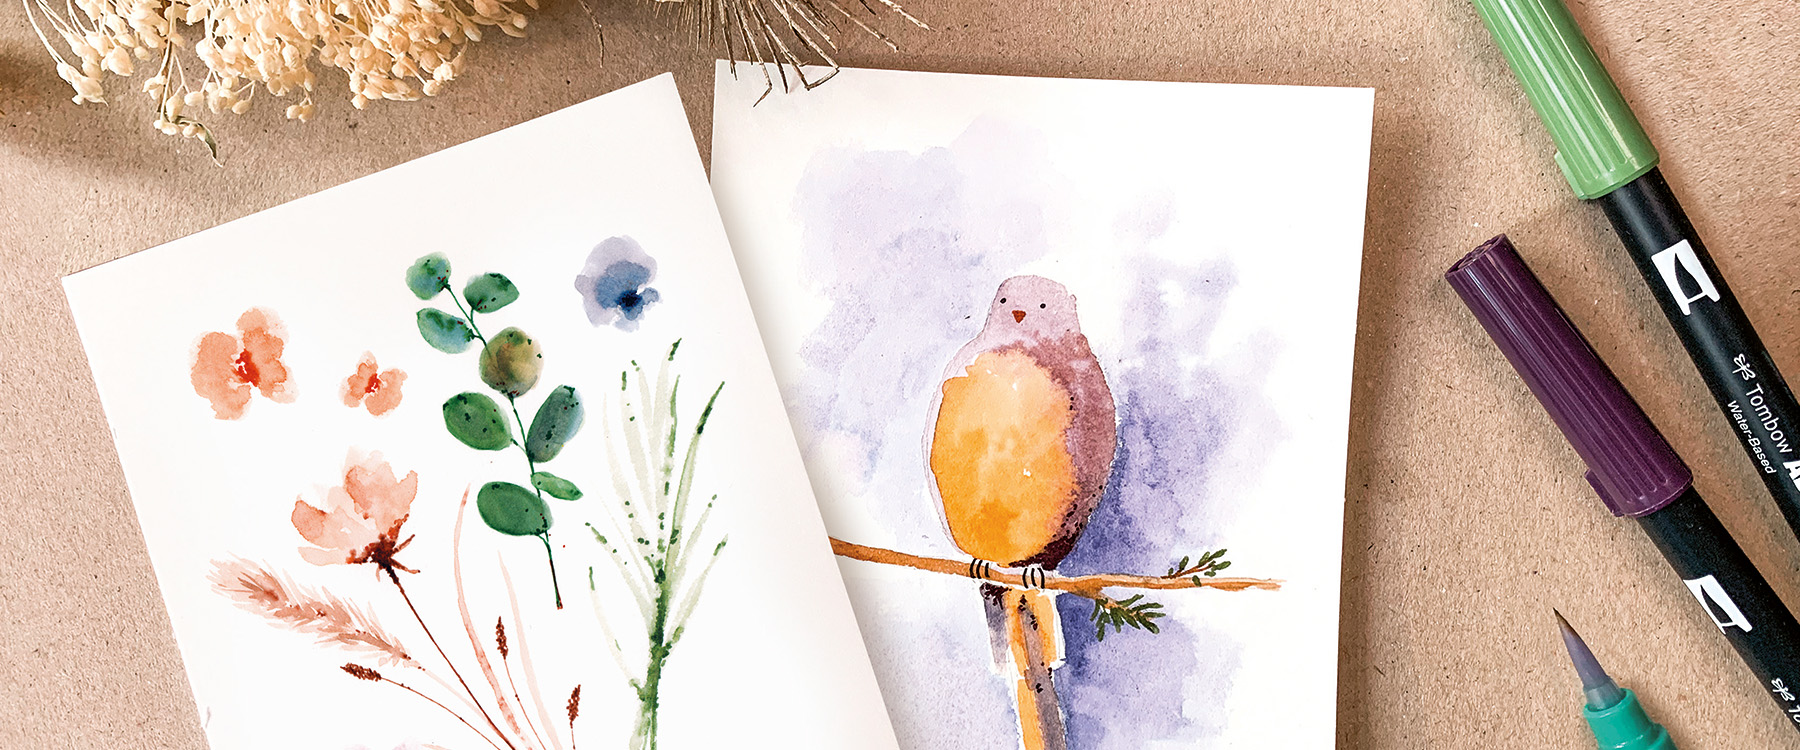 WATERCOLOR PAINTING FOR BEGINNERS-9 PRO TIPS